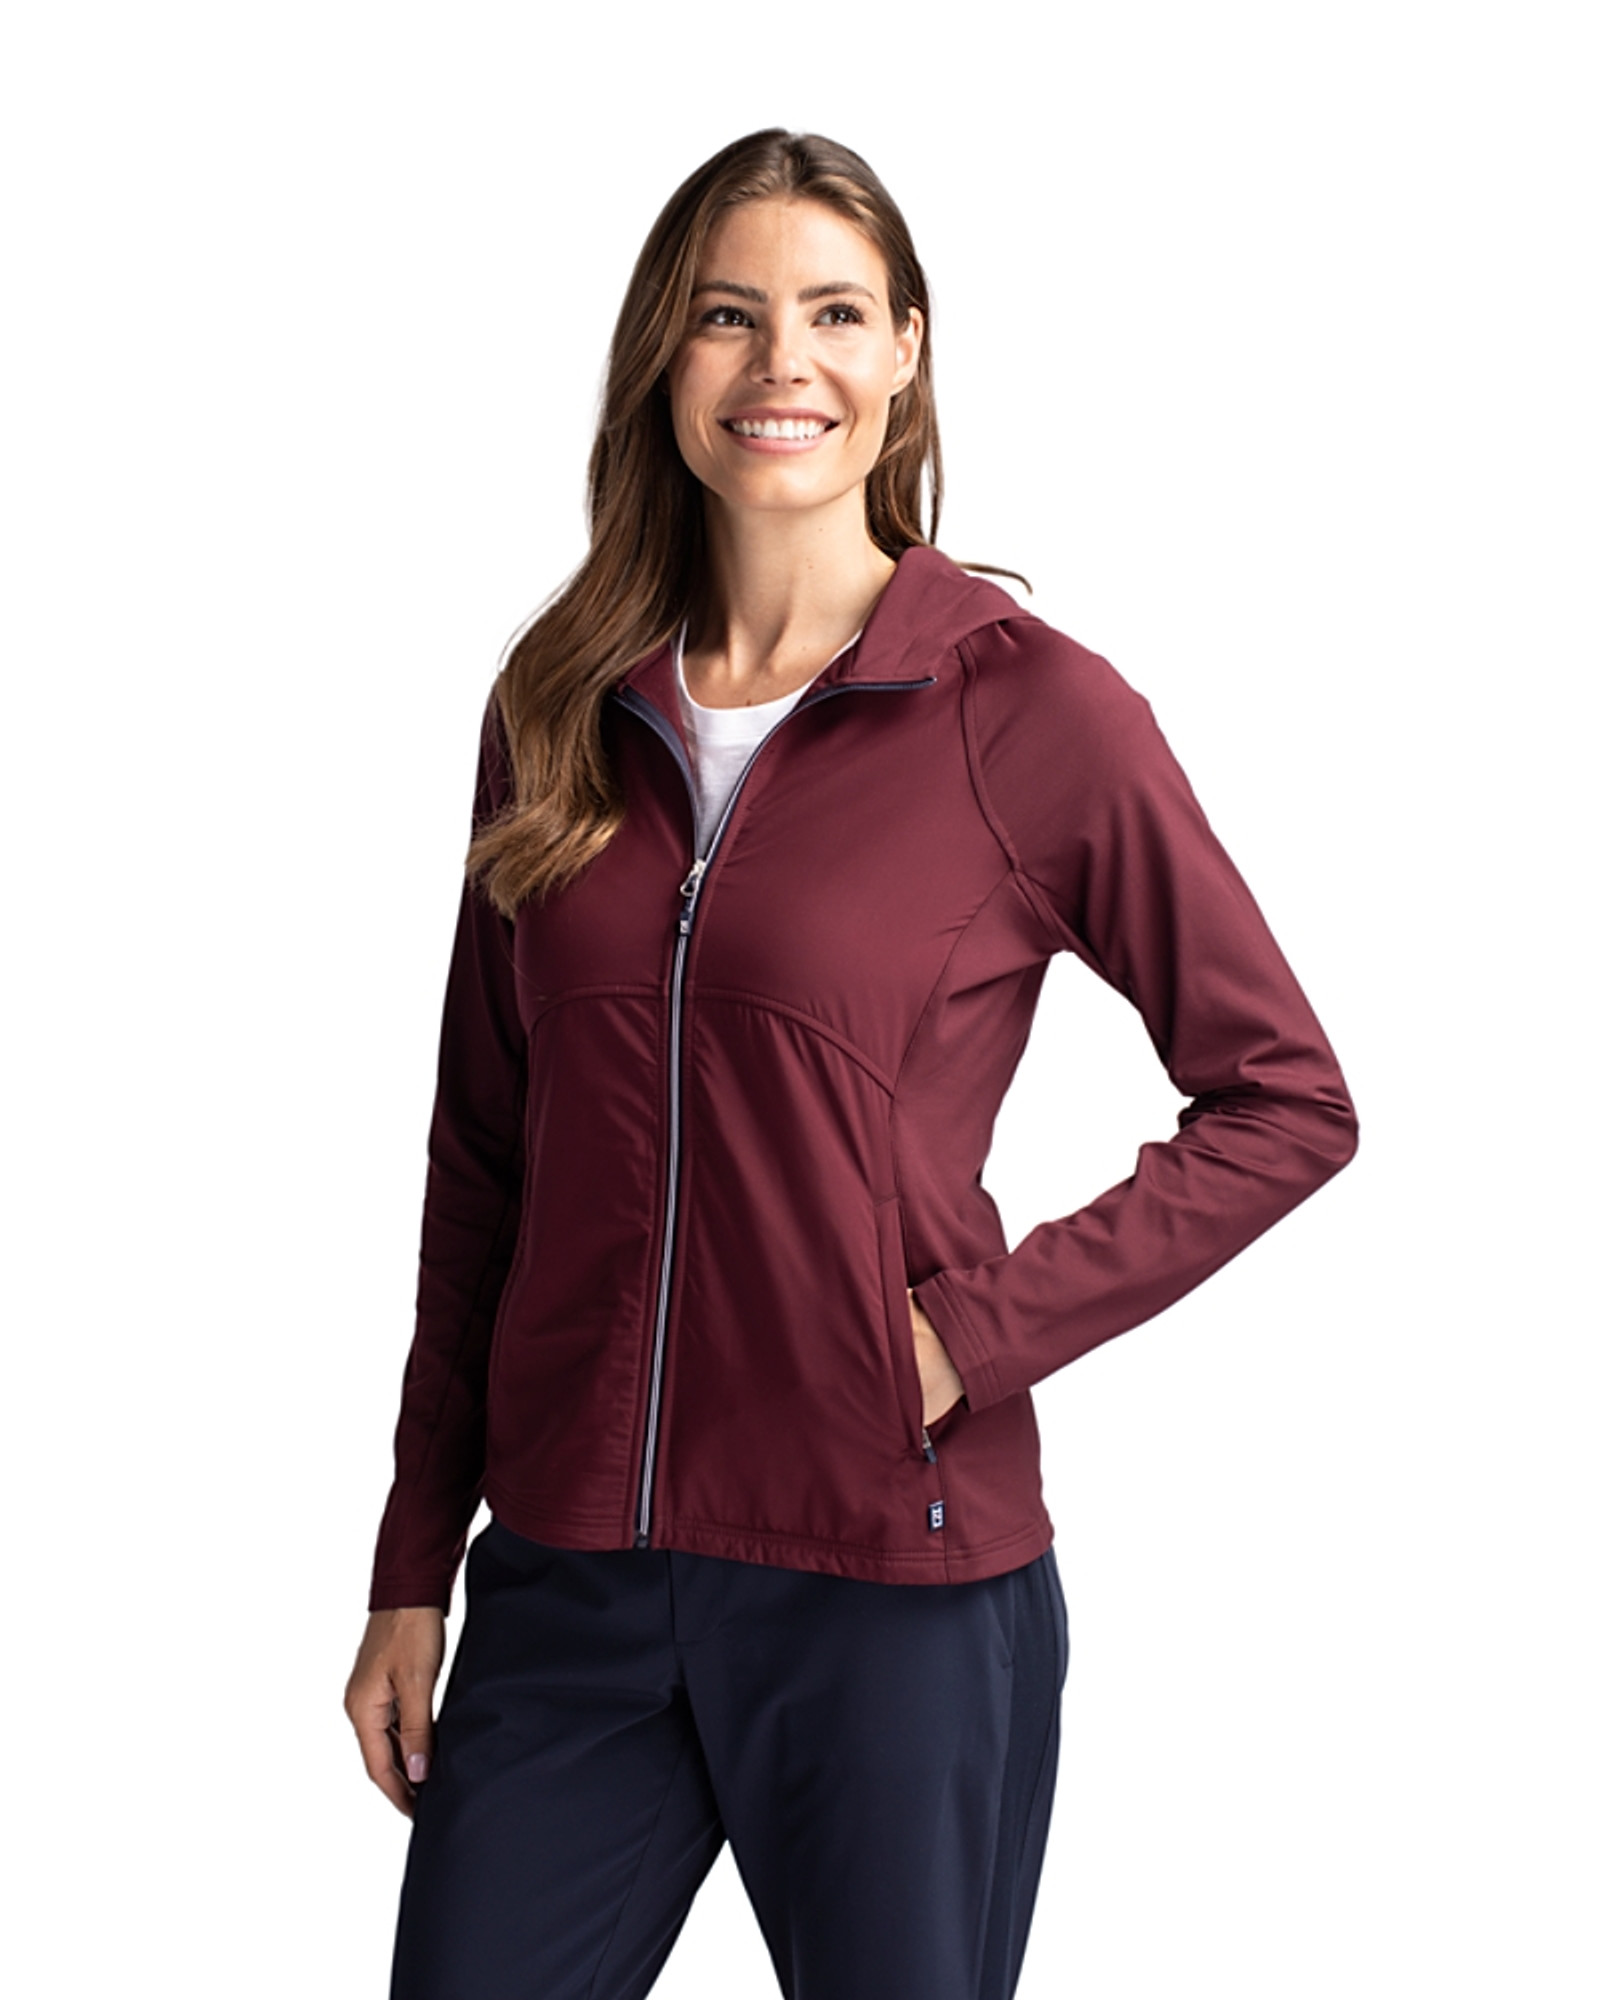 Cutter & Buck Adapt Eco Knit Stretch Recycled Womens Half Zip